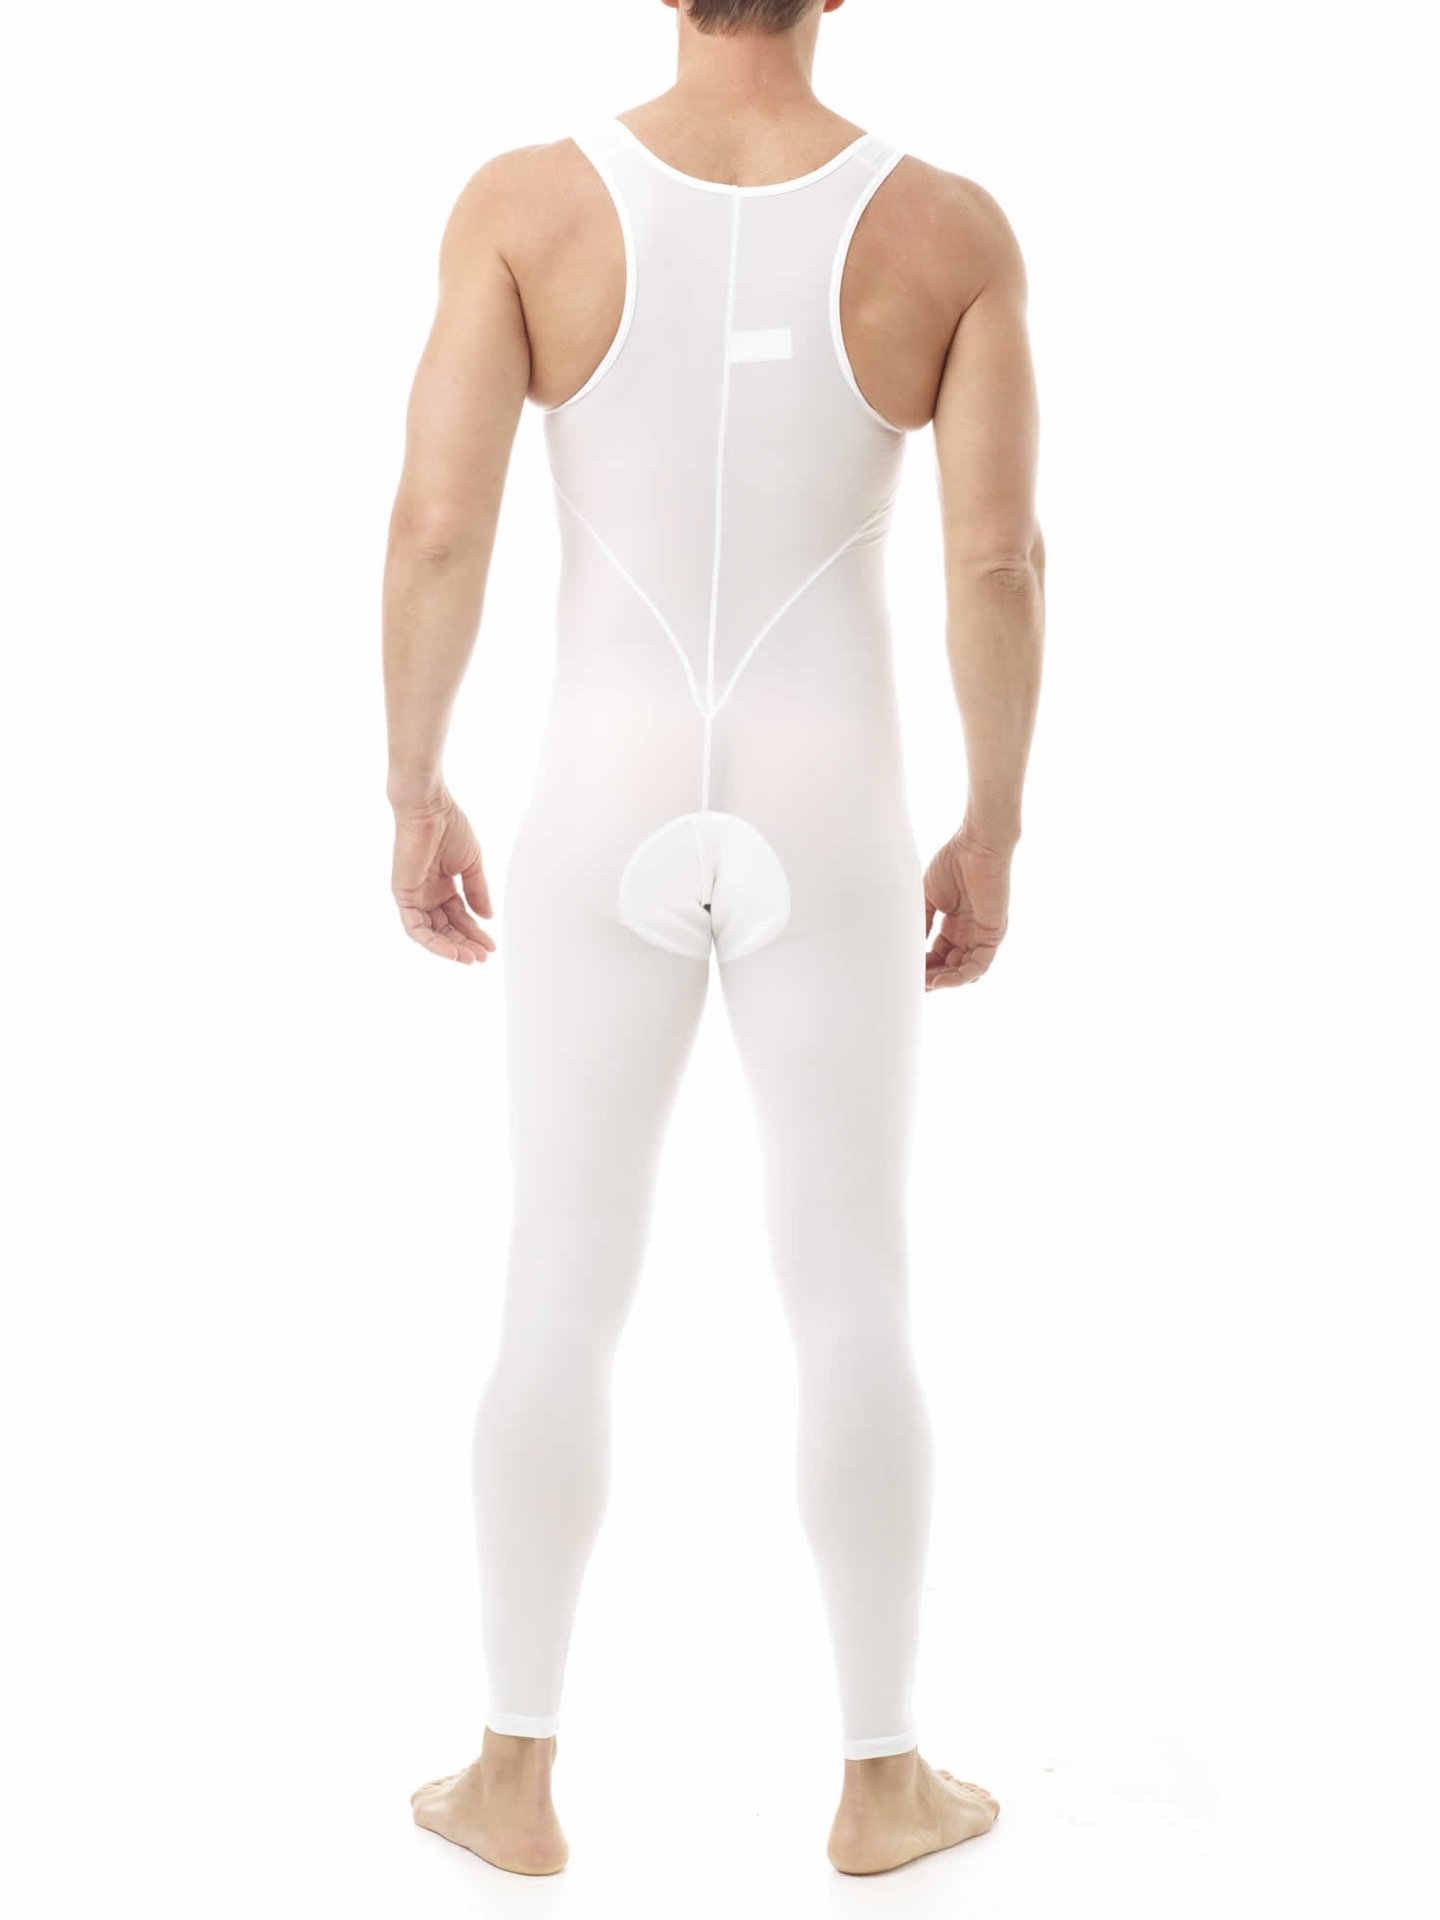 Underworks Mens Hip Buster and Thigh Compression Shaper Brief - White - S